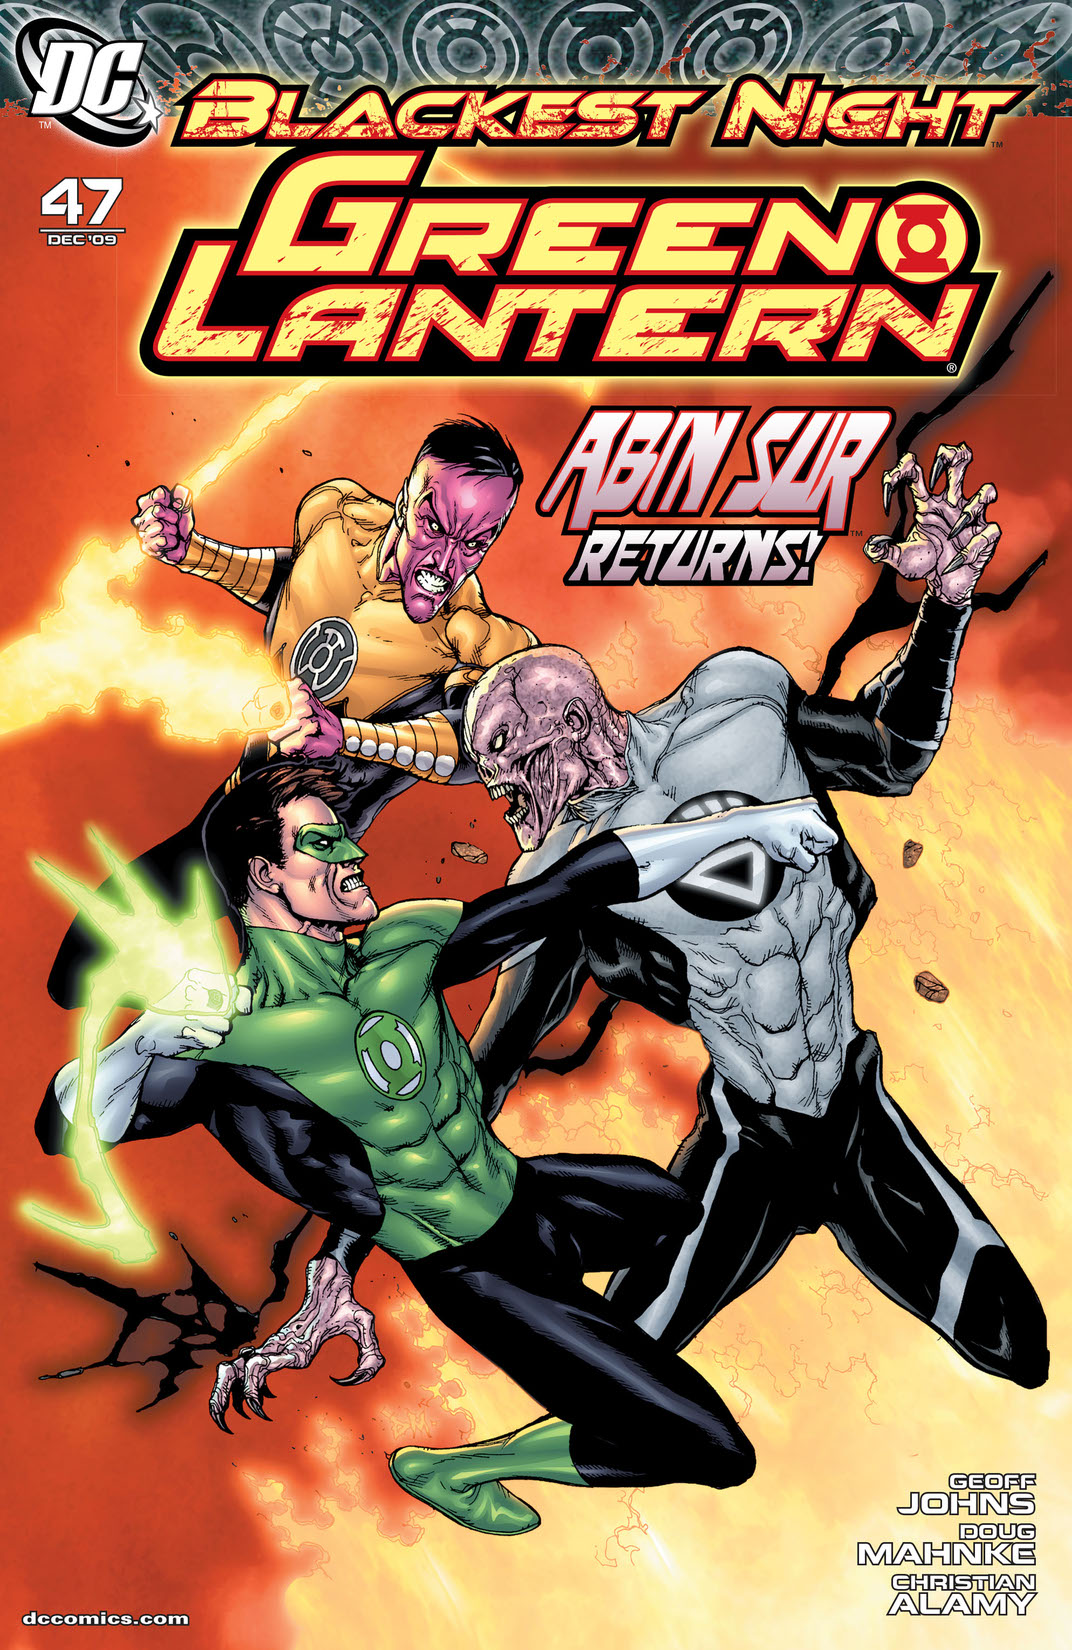 Green Lantern (2005-) #47 preview images